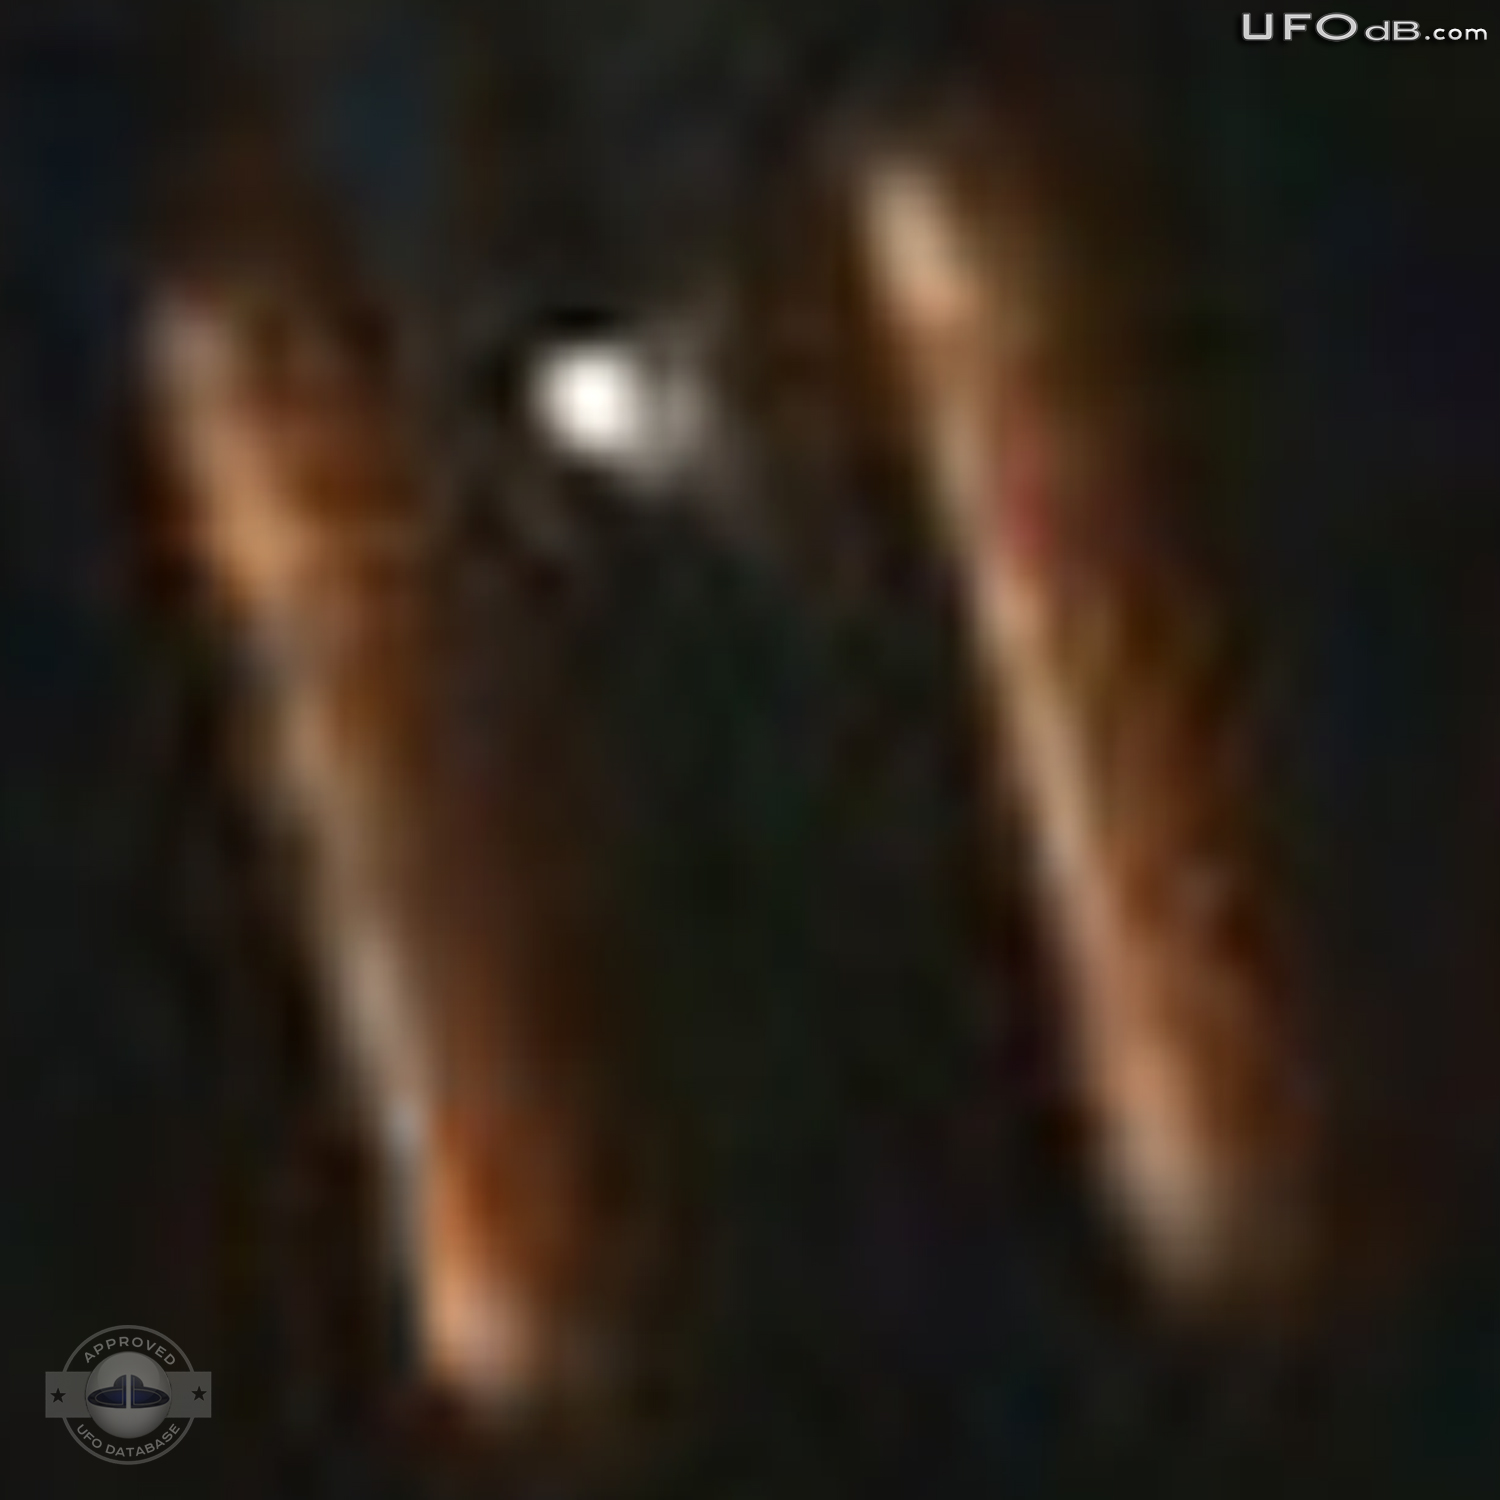 Moon picture captures a very strange shaped UFO | Louisiana USA 2011 UFO Picture #257-6